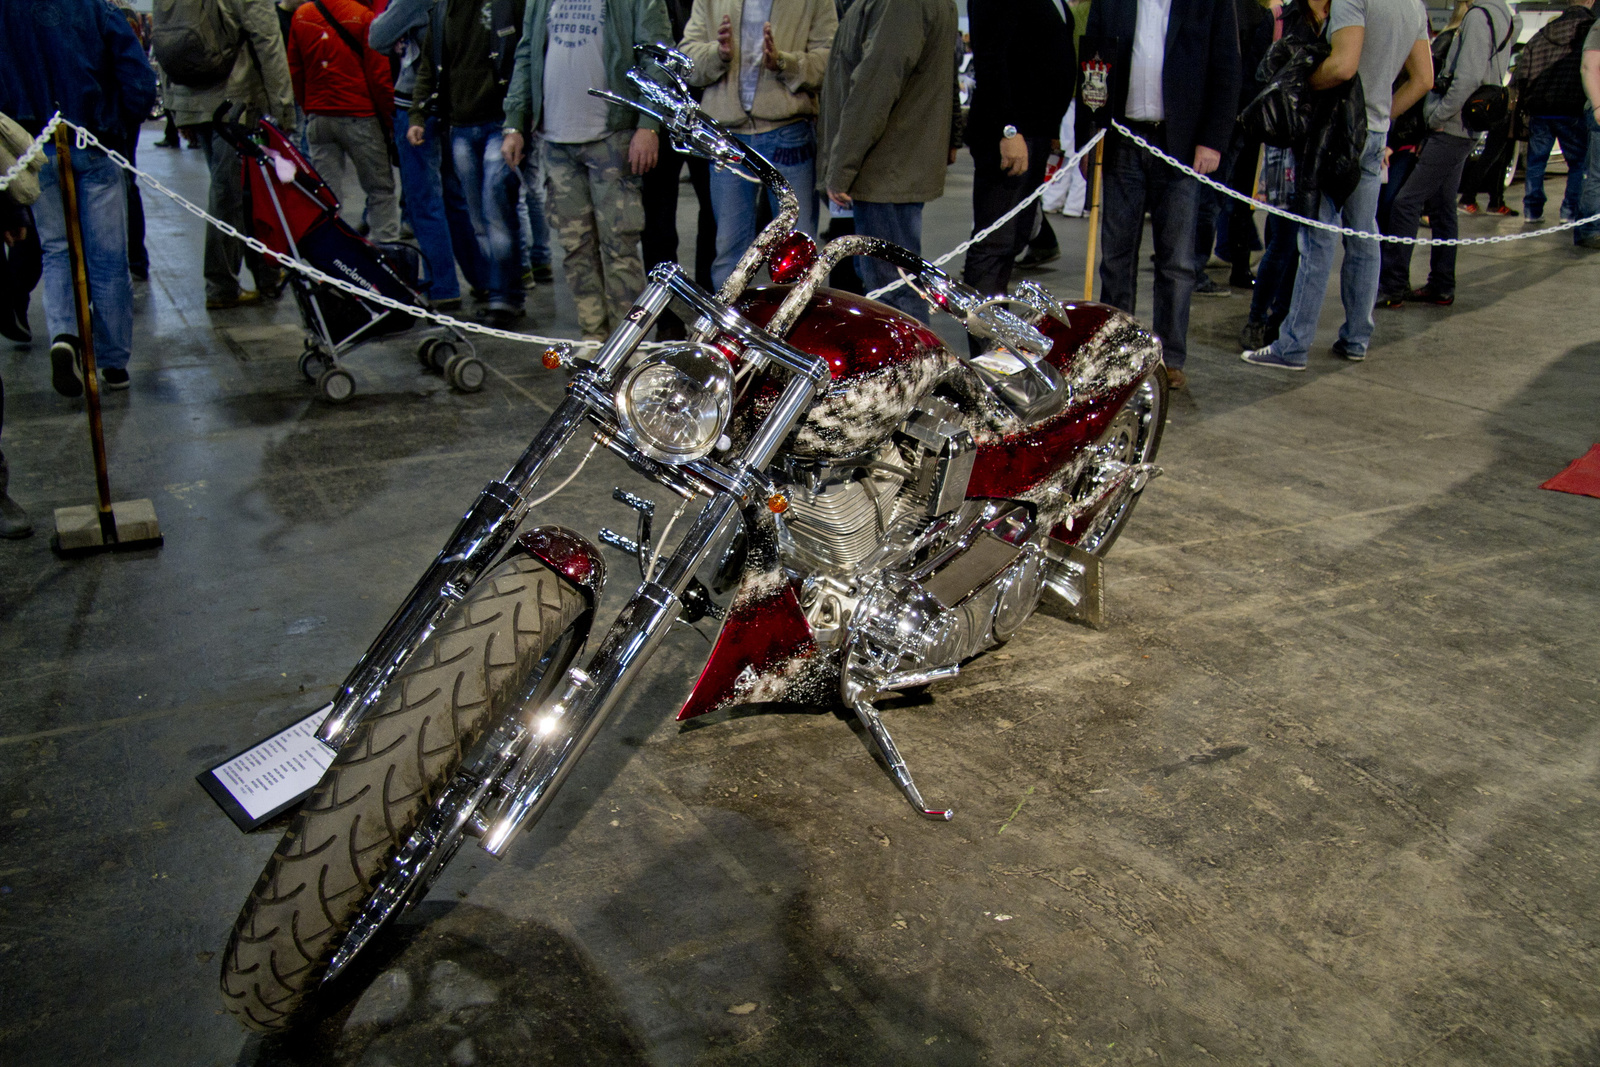 Tuning Show – 2012